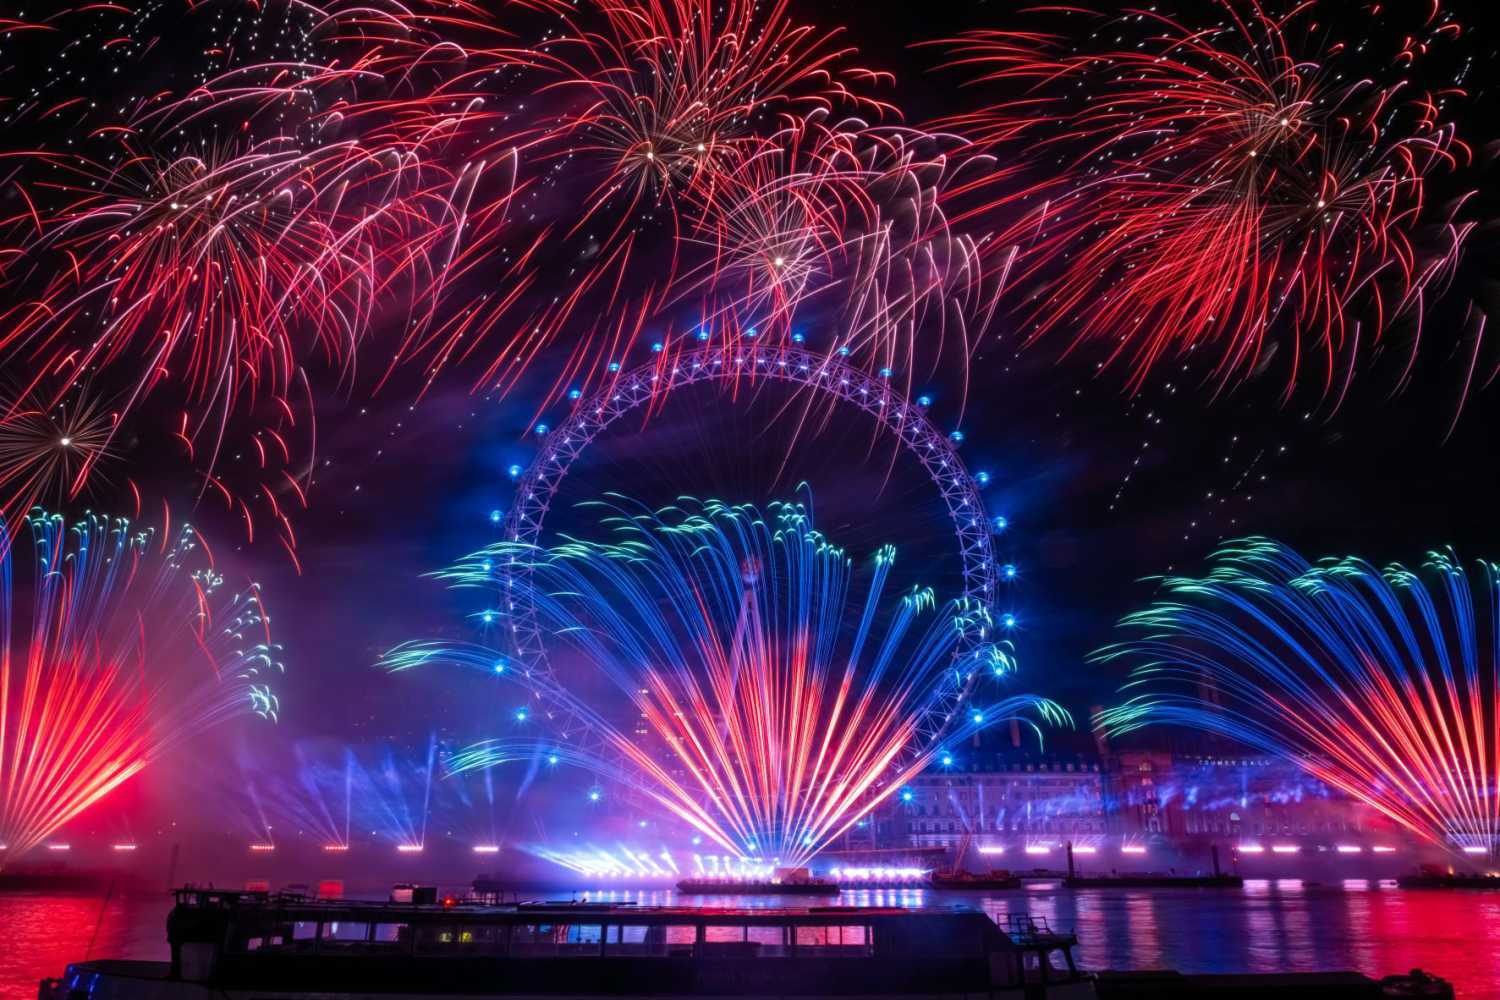 London’s largest ever New Year’s Eve celebration